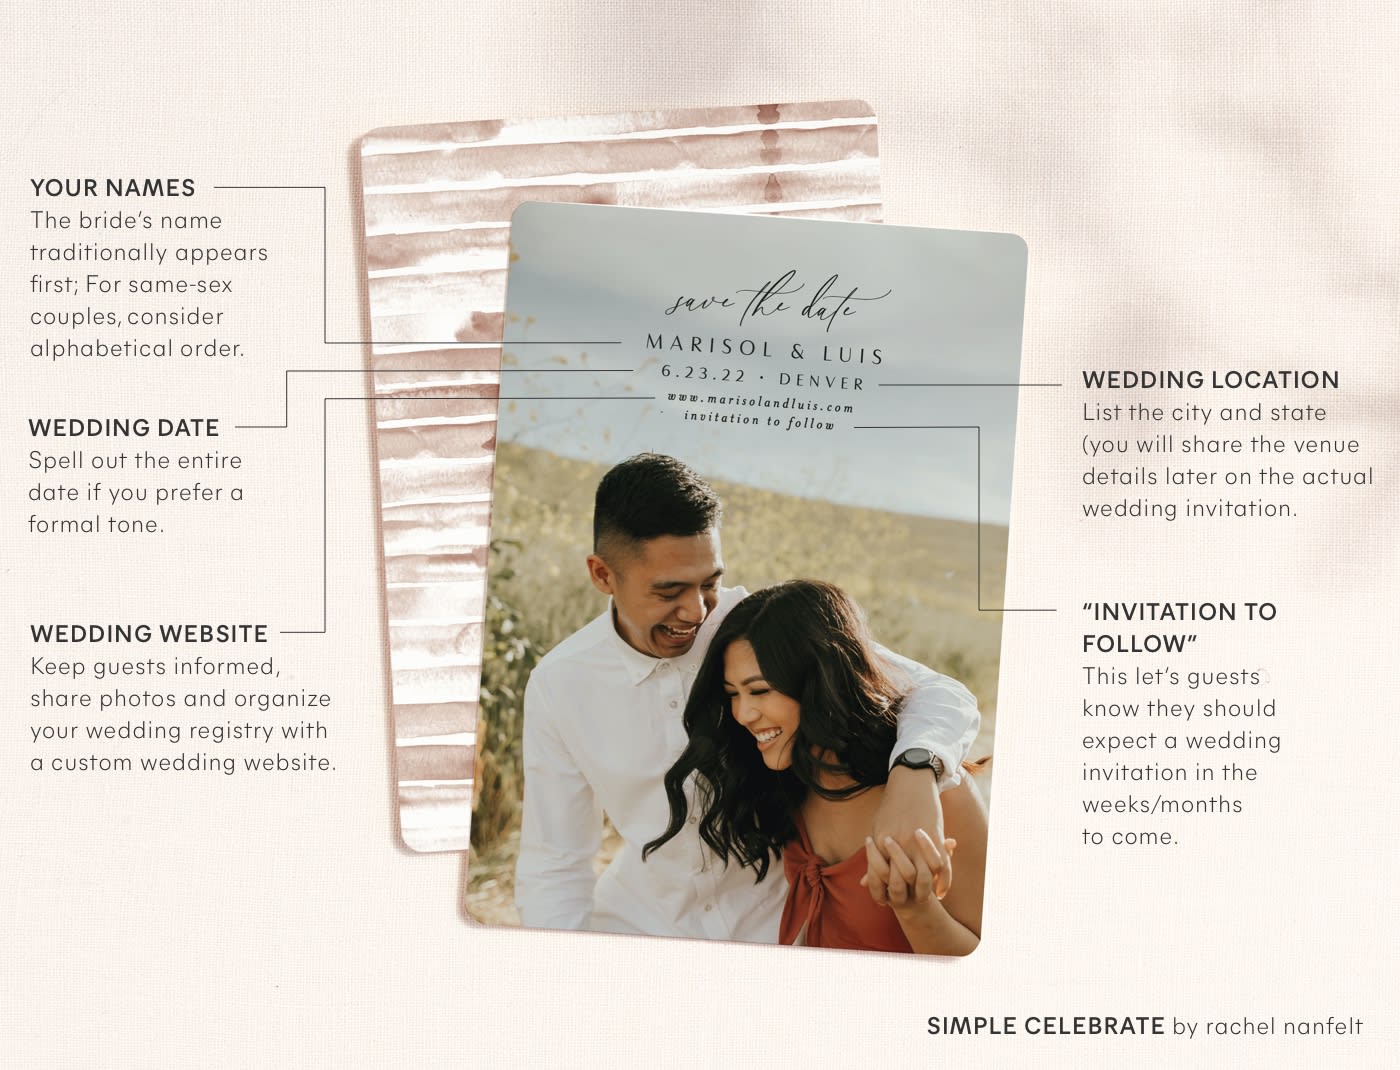 Wedding Invitations Save the Date Information Cards & More! RSVP Gifts 